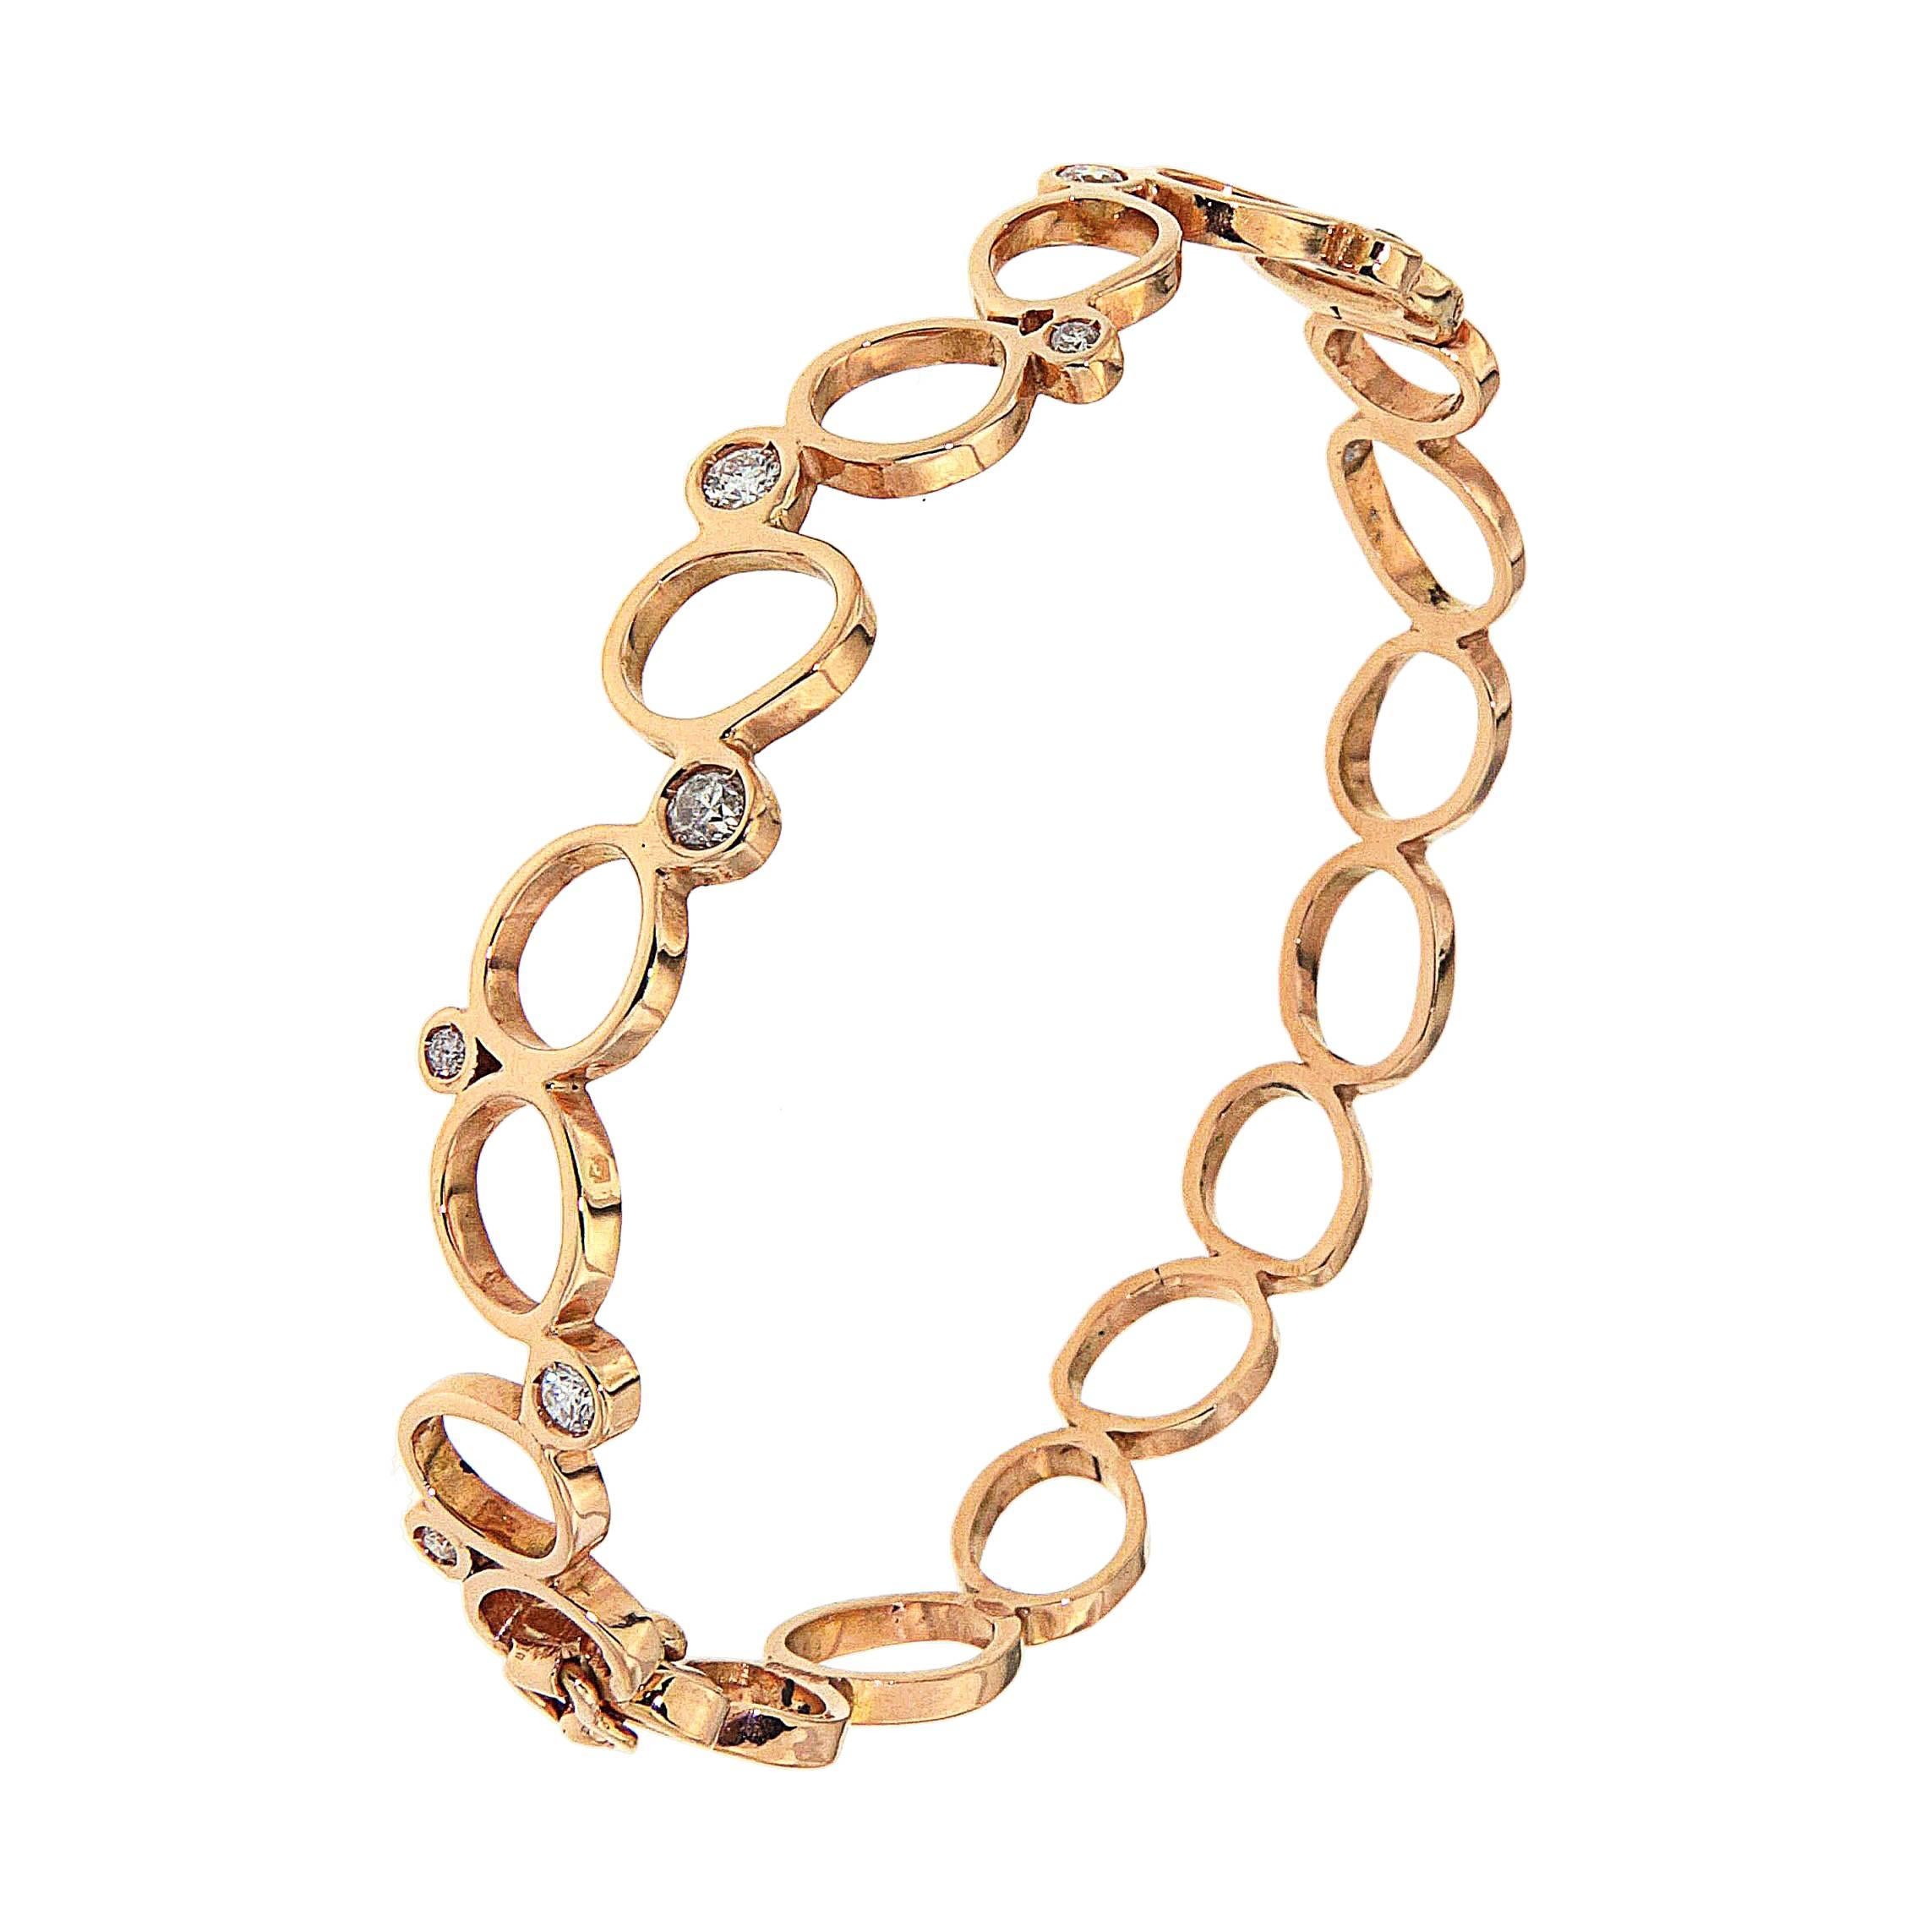 Rose Gold Diamonds Bracelet Hand Crafted in Italy by Botta Gioielli